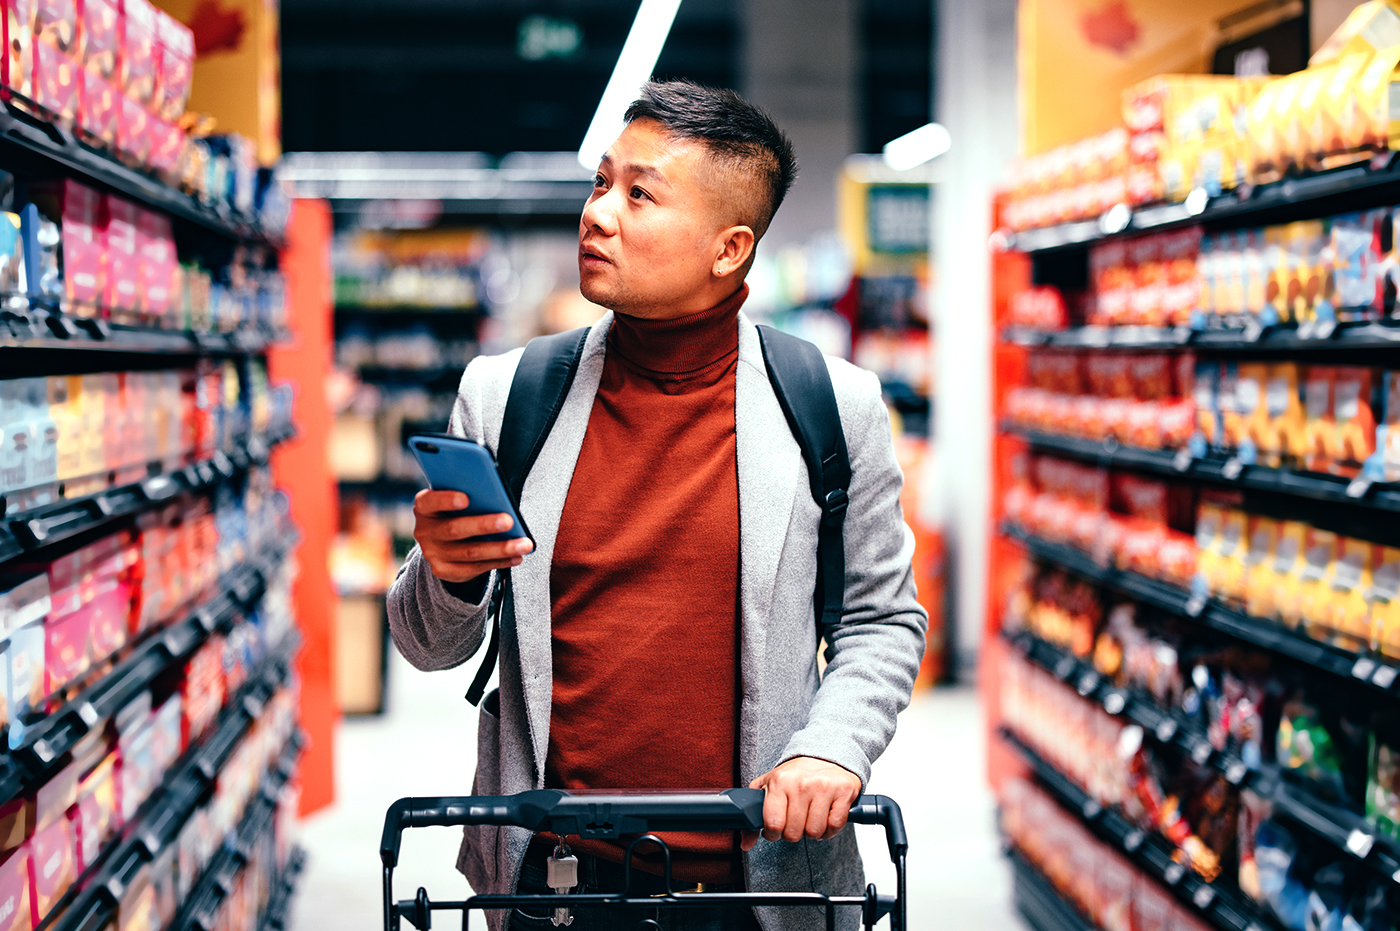 Man shopping in a grocery aisle pushing a shopping cart with a phone in his hand